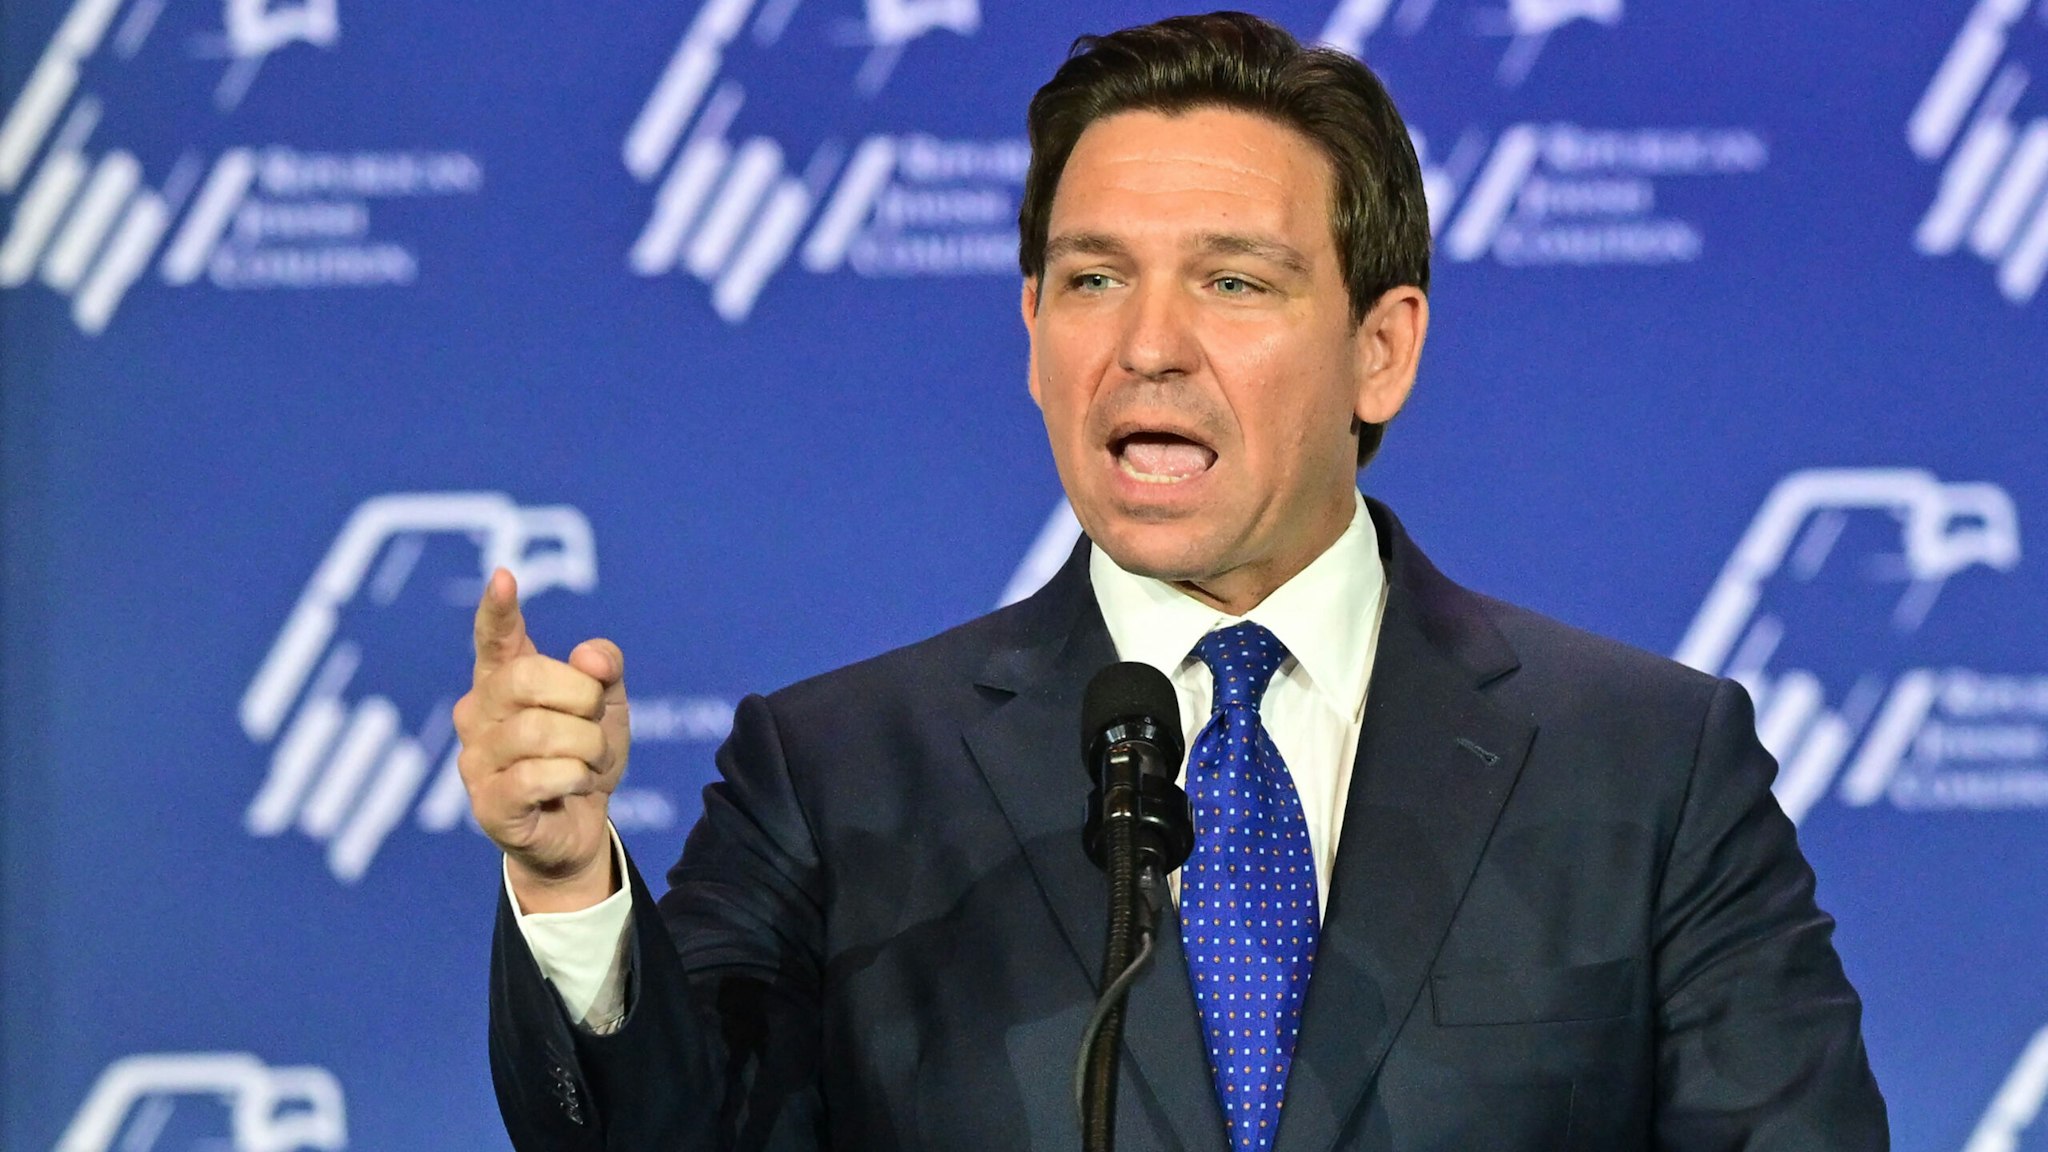 US Republican presidential candidate and Florida Governor Ron DeSantis addresses the Republican Jewish Coalition (RJC) Annual Leadership Summmit on October 28, 2023 at the Venetian Conference Center in Las Vegas, Nevada.